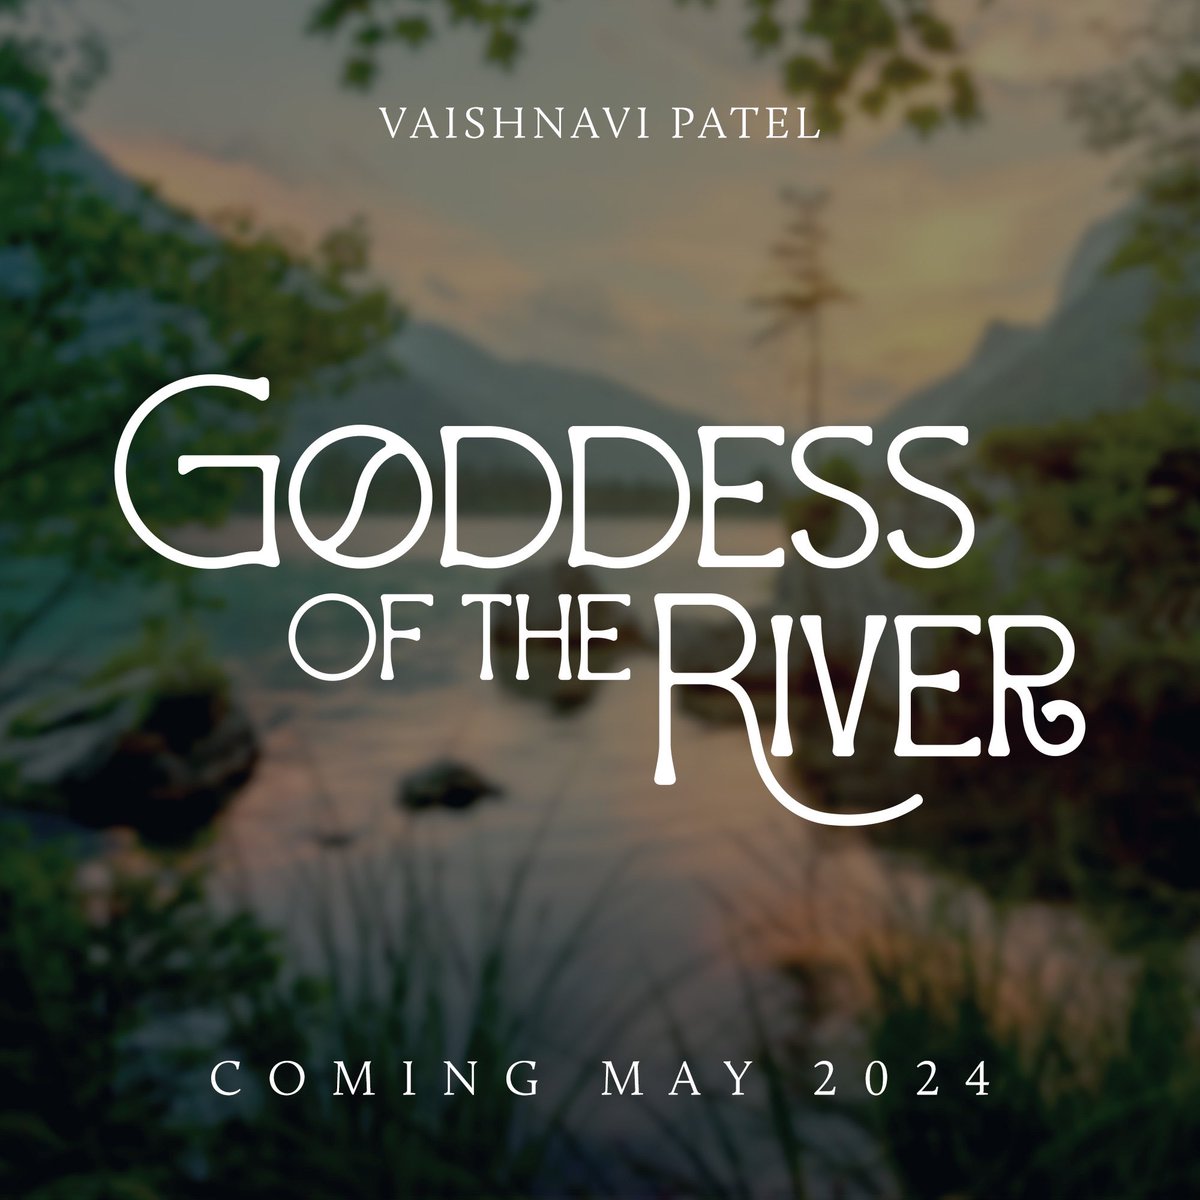 ✨✨I am thrilled to announce the title of my second book: GODDESS OF THE RIVER ✨✨ Coming May 2024 from @orbitbooks—a Mahabharata retelling from the perspective of Ganga and her son, Bhishma, a story of dharma and responsibility, of family and finding hope in tragedy 🌊⚔️